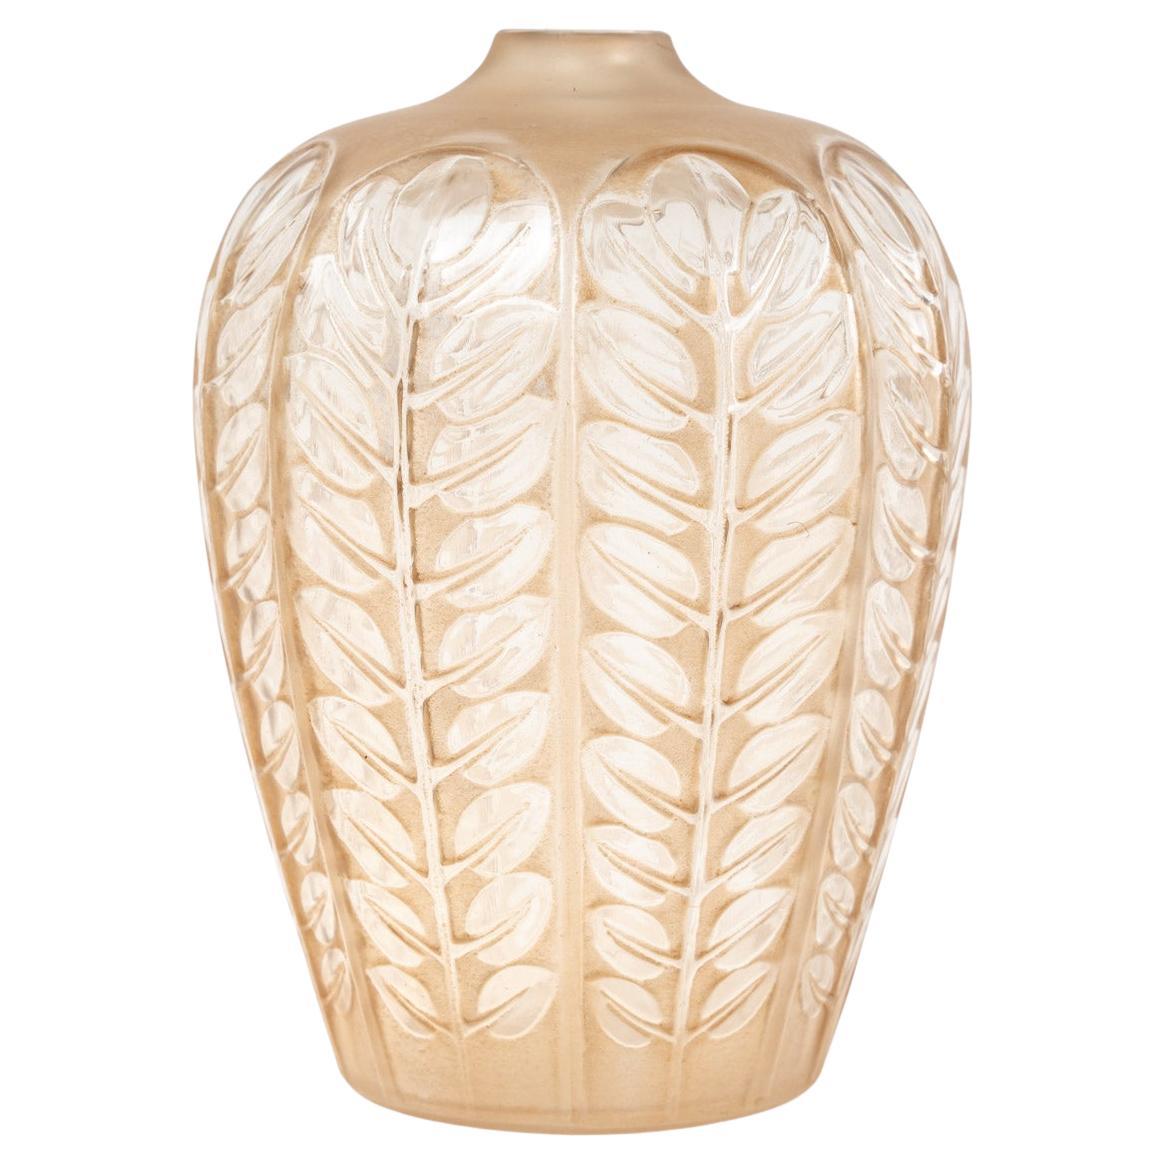 1924 René Lalique Tournai Vase Clear and Frosted Glass with Sepia Patina